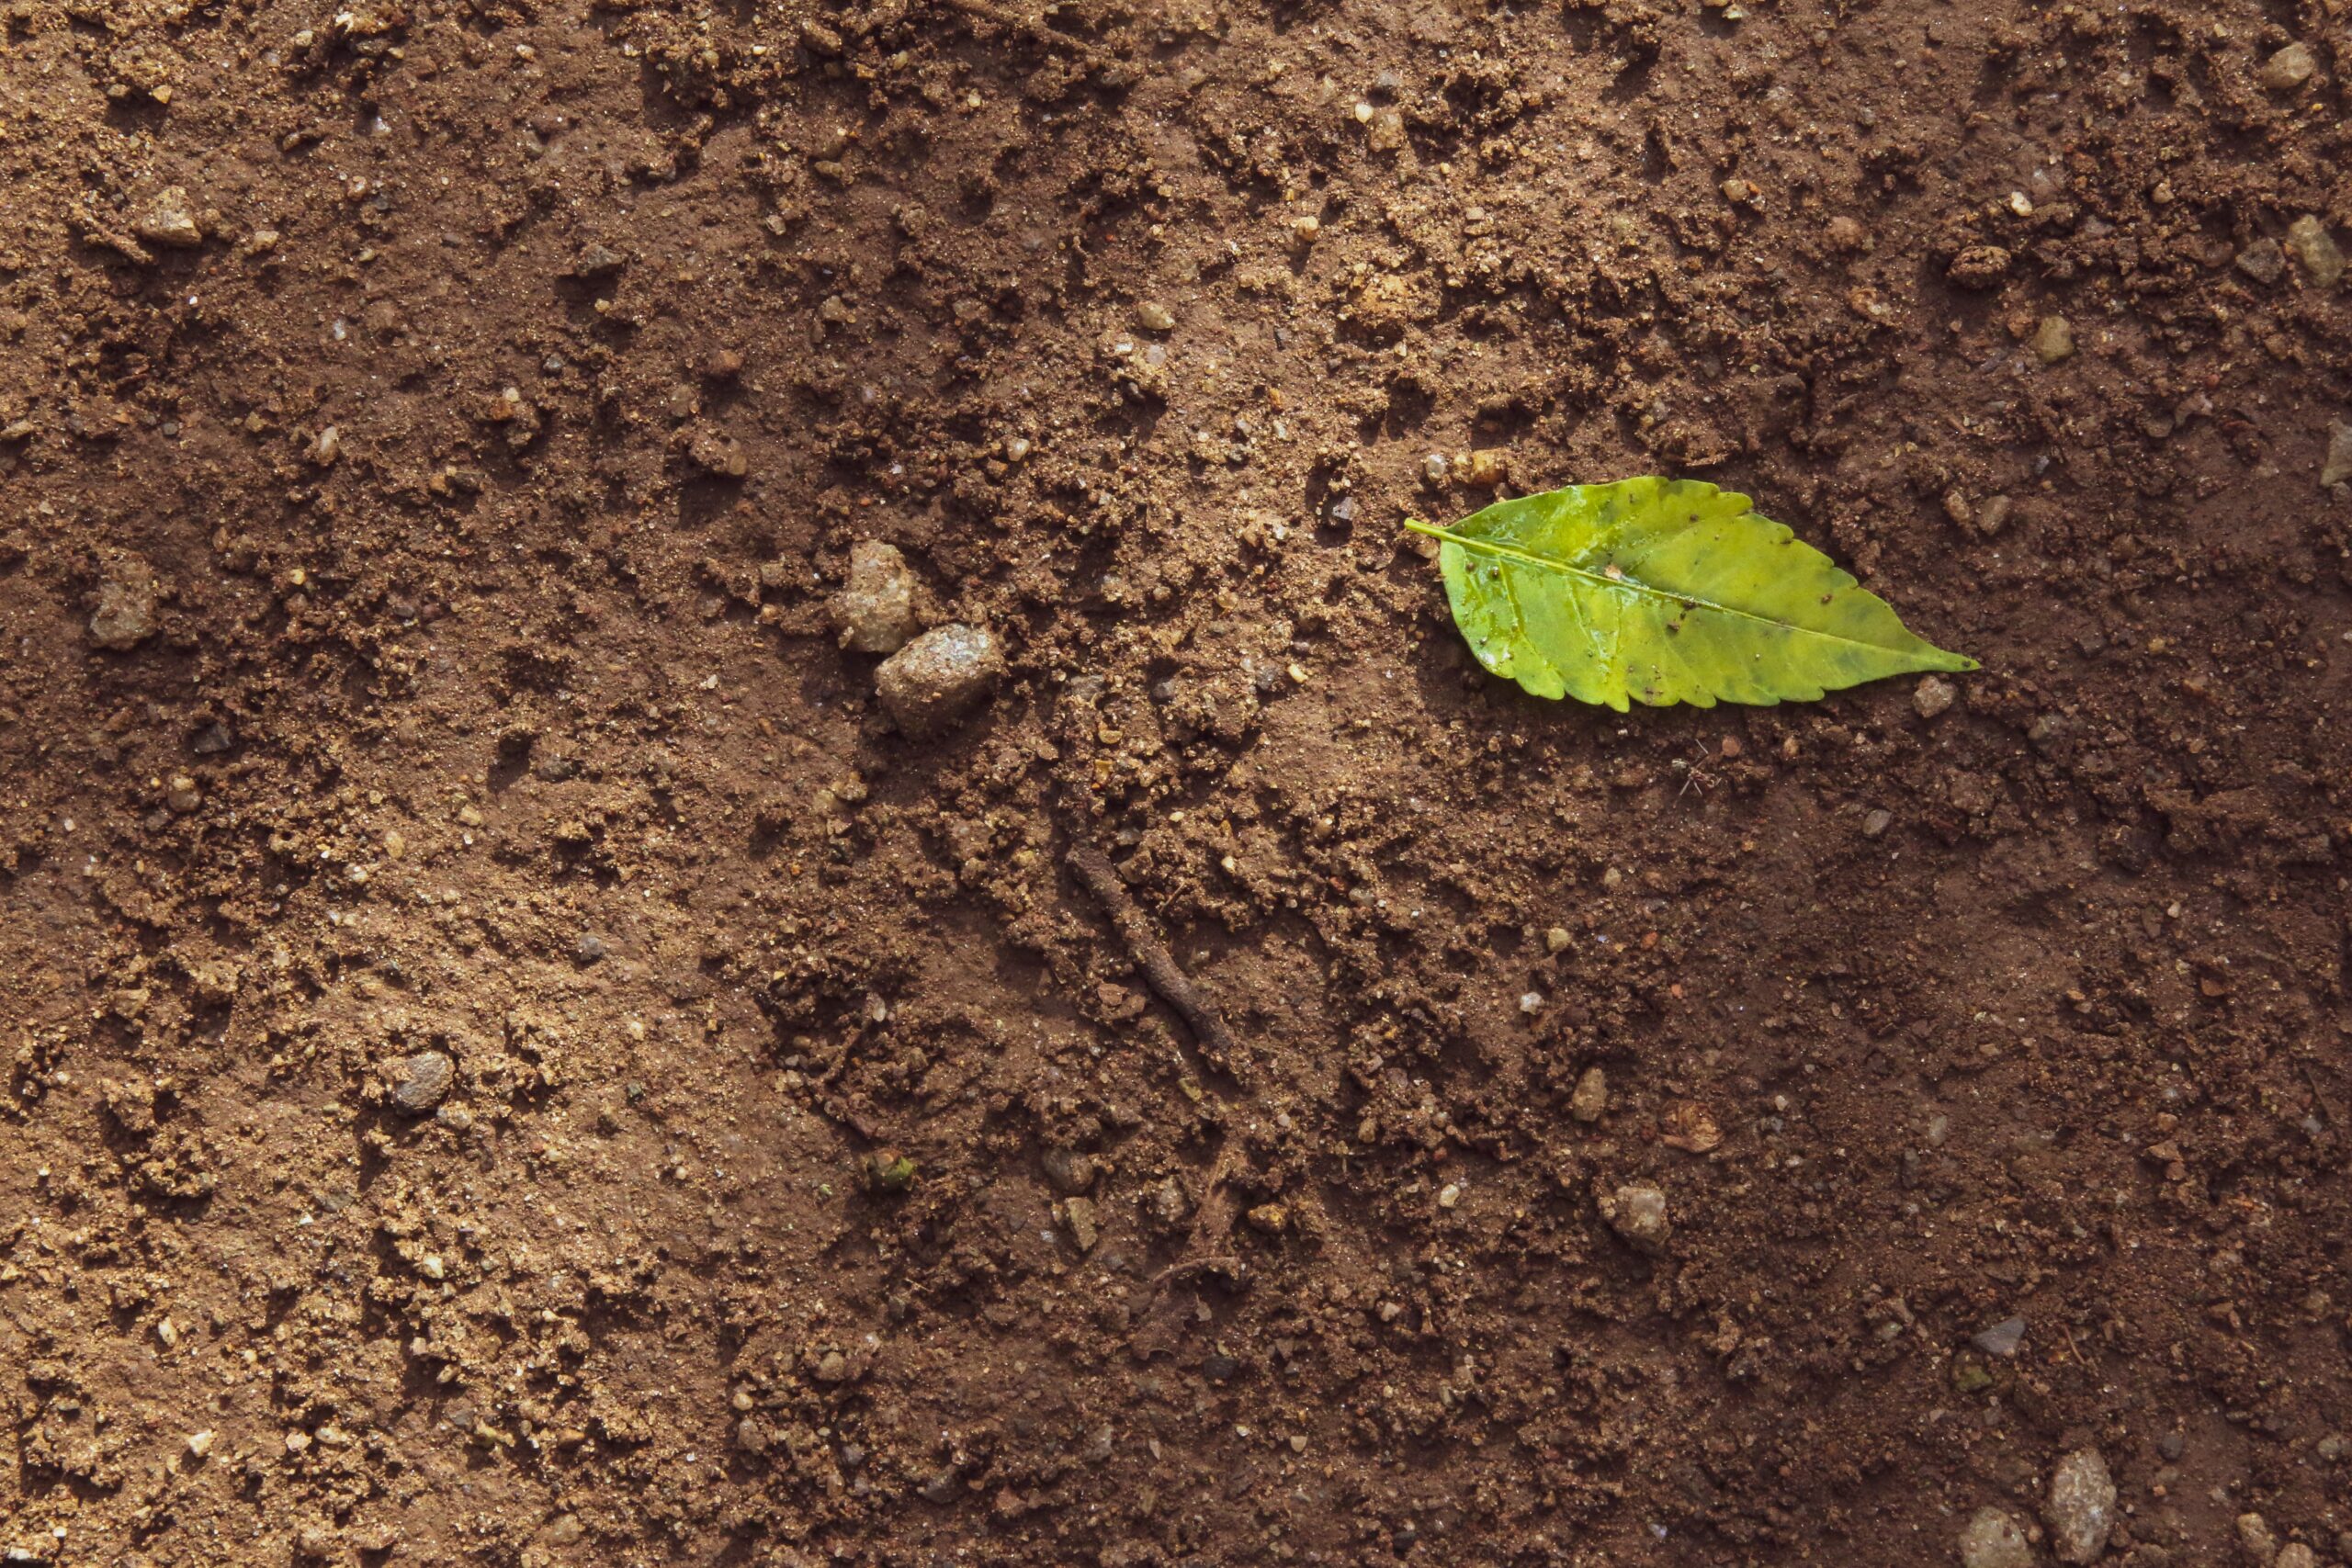 How to improve soil quality for your garden